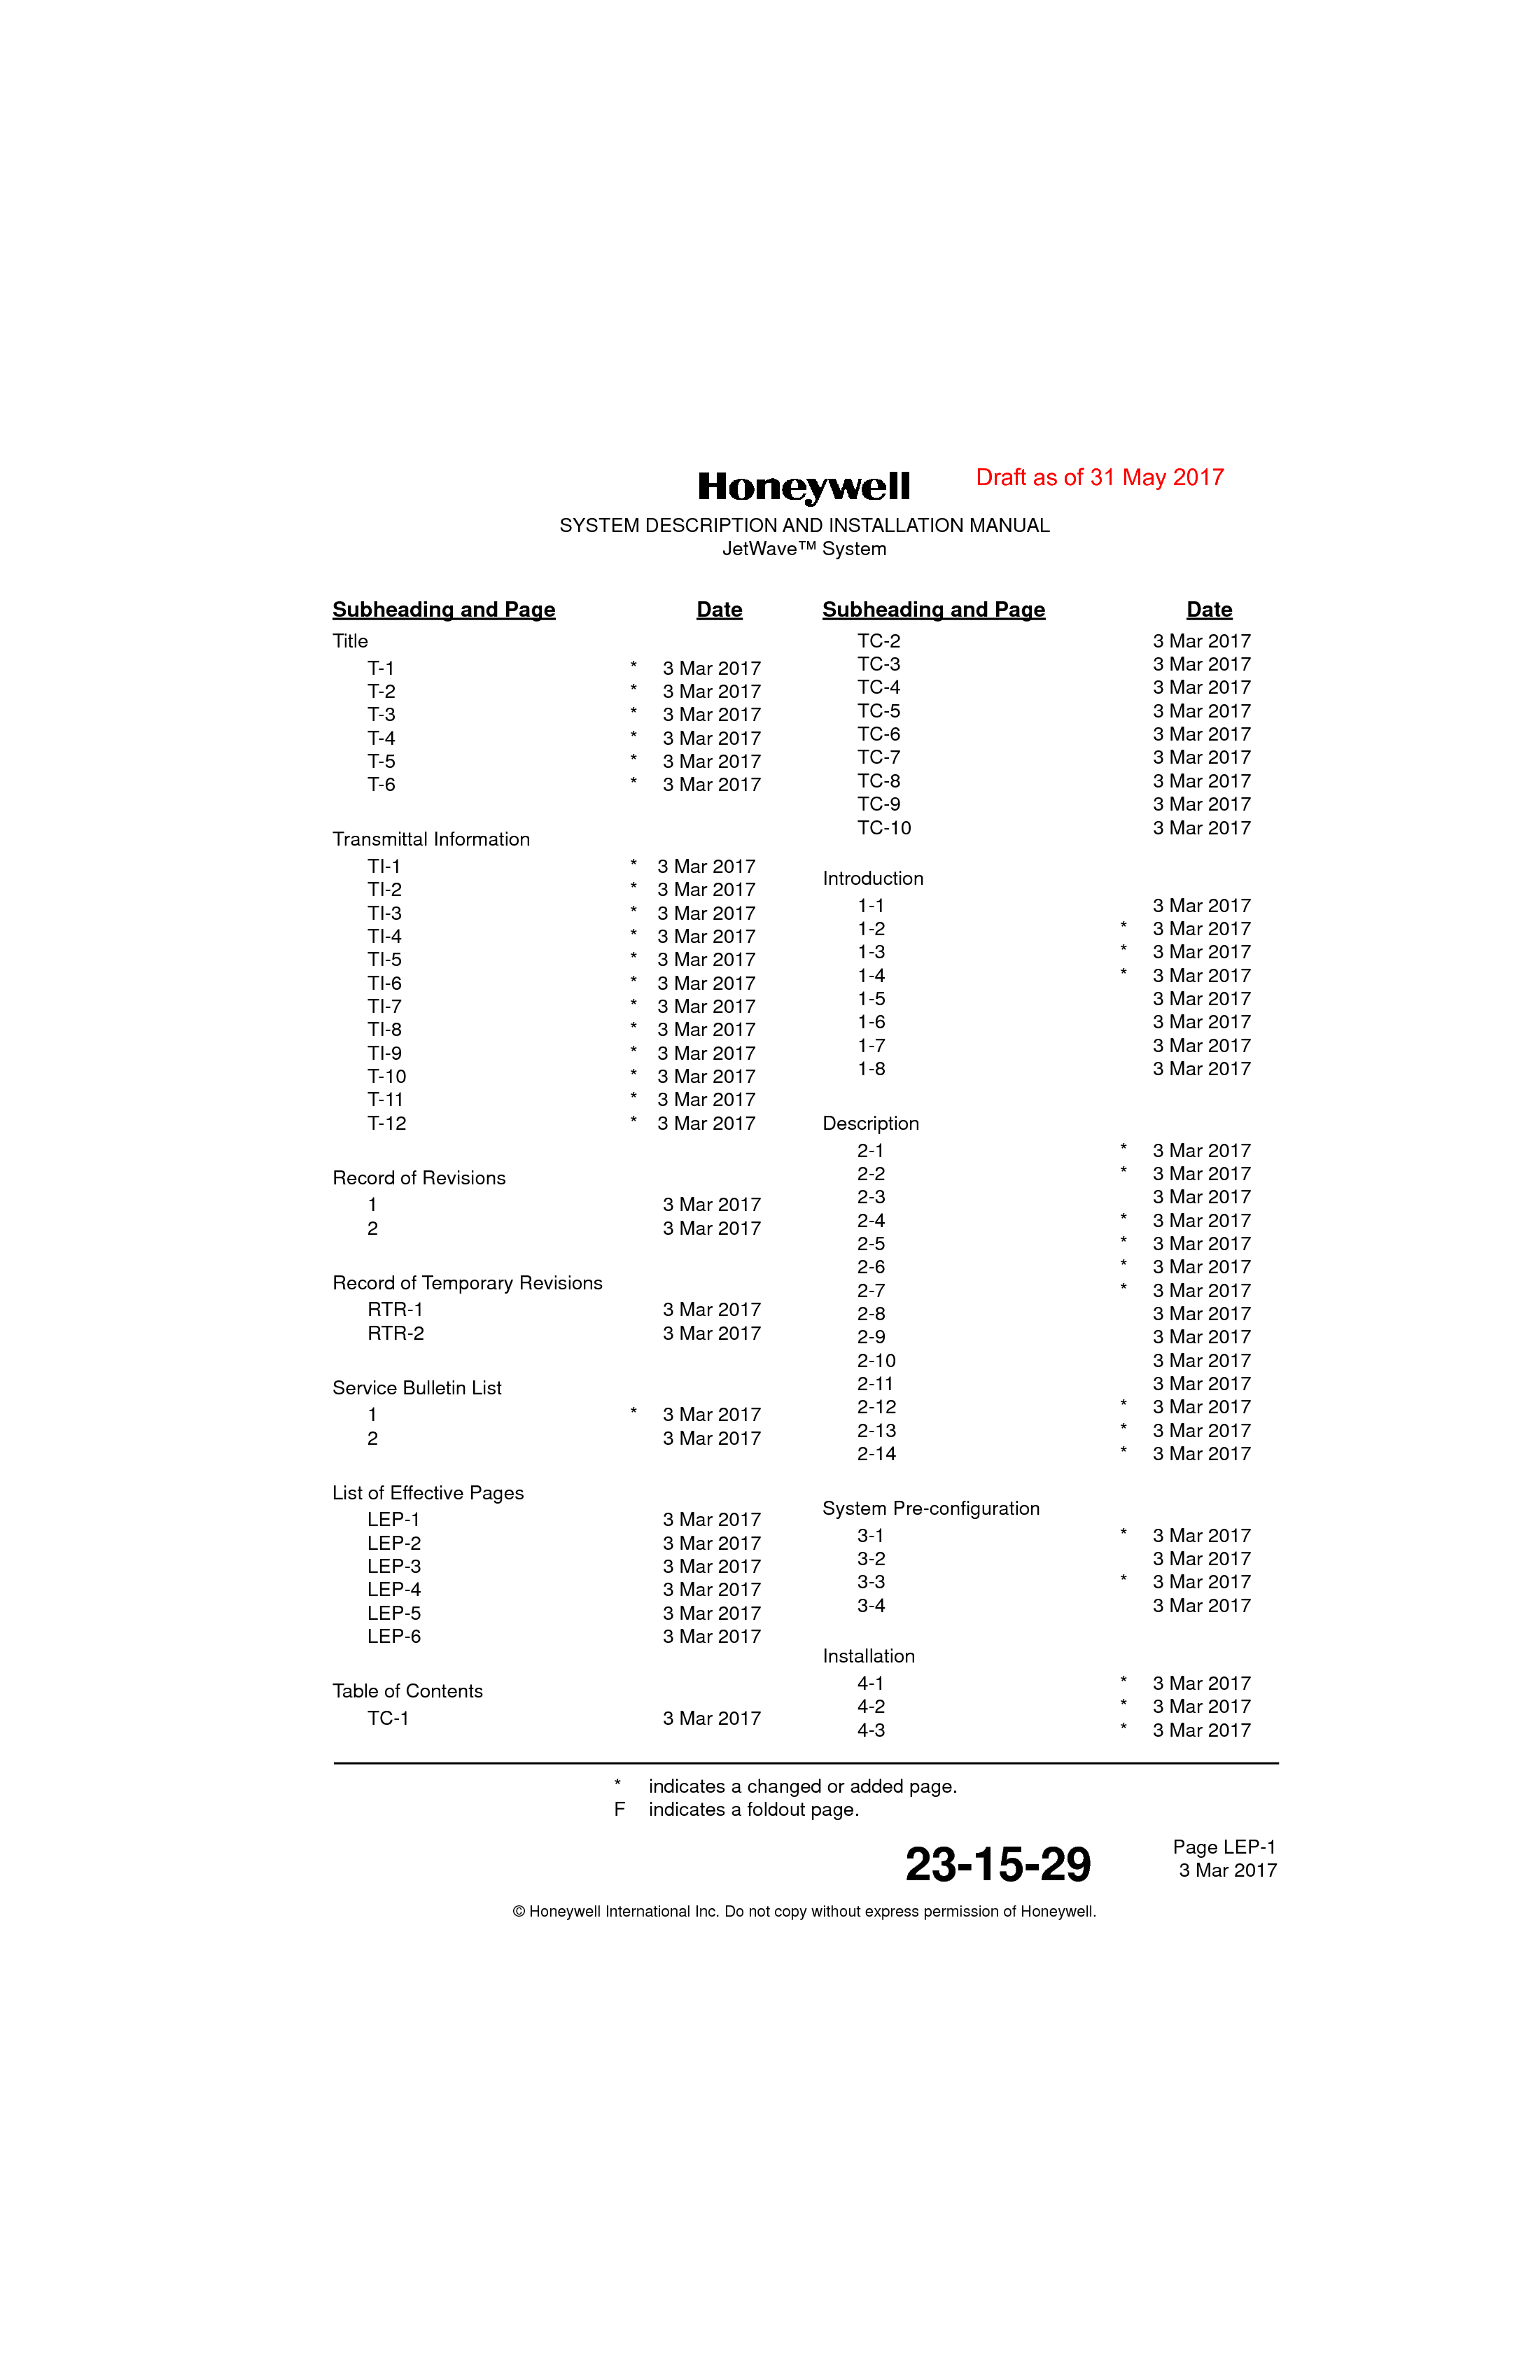 Page LEP-1 3 Mar 201723-15-29SYSTEM DESCRIPTION AND INSTALLATION MANUALJetWave™ System© Honeywell International Inc. Do not copy without express permission of Honeywell.Subheading and Page Date Subheading and Page Date* indicates a changed or added page.F indicates a foldout page.TitleT-1 *  3 Mar 2017T-2 *  3 Mar 2017T-3 *  3 Mar 2017T-4 *  3 Mar 2017 T-5 *  3 Mar 2017T-6 *  3 Mar 2017Transmittal InformationTI-1 * 3 Mar 2017TI-2 * 3 Mar 2017TI-3 * 3 Mar 2017TI-4 * 3 Mar 2017TI-5 * 3 Mar 2017 TI-6 * 3 Mar 2017TI-7 * 3 Mar 2017 TI-8 * 3 Mar 2017TI-9 * 3 Mar 2017T-10 * 3 Mar 2017T-11 * 3 Mar 2017T-12 * 3 Mar 2017Record of Revisions1  3 Mar 20172  3 Mar 2017Record of Temporary RevisionsRTR-1  3 Mar 2017RTR-2  3 Mar 2017Service Bulletin List1 *  3 Mar 20172  3 Mar 2017List of Effective PagesLEP-1  3 Mar 2017LEP-2  3 Mar 2017LEP-3  3 Mar 2017LEP-4  3 Mar 2017LEP-5  3 Mar 2017LEP-6  3 Mar 2017Table of ContentsTC-1  3 Mar 2017TC-2  3 Mar 2017TC-3  3 Mar 2017TC-4  3 Mar 2017TC-5  3 Mar 2017 TC-6  3 Mar 2017 TC-7  3 Mar 2017 TC-8  3 Mar 2017 TC-9  3 Mar 2017 TC-10  3 Mar 2017Introduction1-1  3 Mar 20171-2 *  3 Mar 20171-3 *  3 Mar 20171-4 *  3 Mar 20171-5  3 Mar 20171-6  3 Mar 20171-7  3 Mar 20171-8  3 Mar 2017Description2-1 *  3 Mar 20172-2 *  3 Mar 20172-3  3 Mar 20172-4 *  3 Mar 20172-5 *  3 Mar 20172-6 *  3 Mar 20172-7 *  3 Mar 20172-8  3 Mar 20172-9  3 Mar 20172-10  3 Mar 20172-11  3 Mar 20172-12 *  3 Mar 20172-13 *  3 Mar 20172-14 *  3 Mar 2017System Pre-configuration3-1 *  3 Mar 20173-2  3 Mar 20173-3 *  3 Mar 20173-4  3 Mar 2017 Installation4-1 *  3 Mar 20174-2 *  3 Mar 20174-3 *  3 Mar 2017Draft as of 31 May 2017